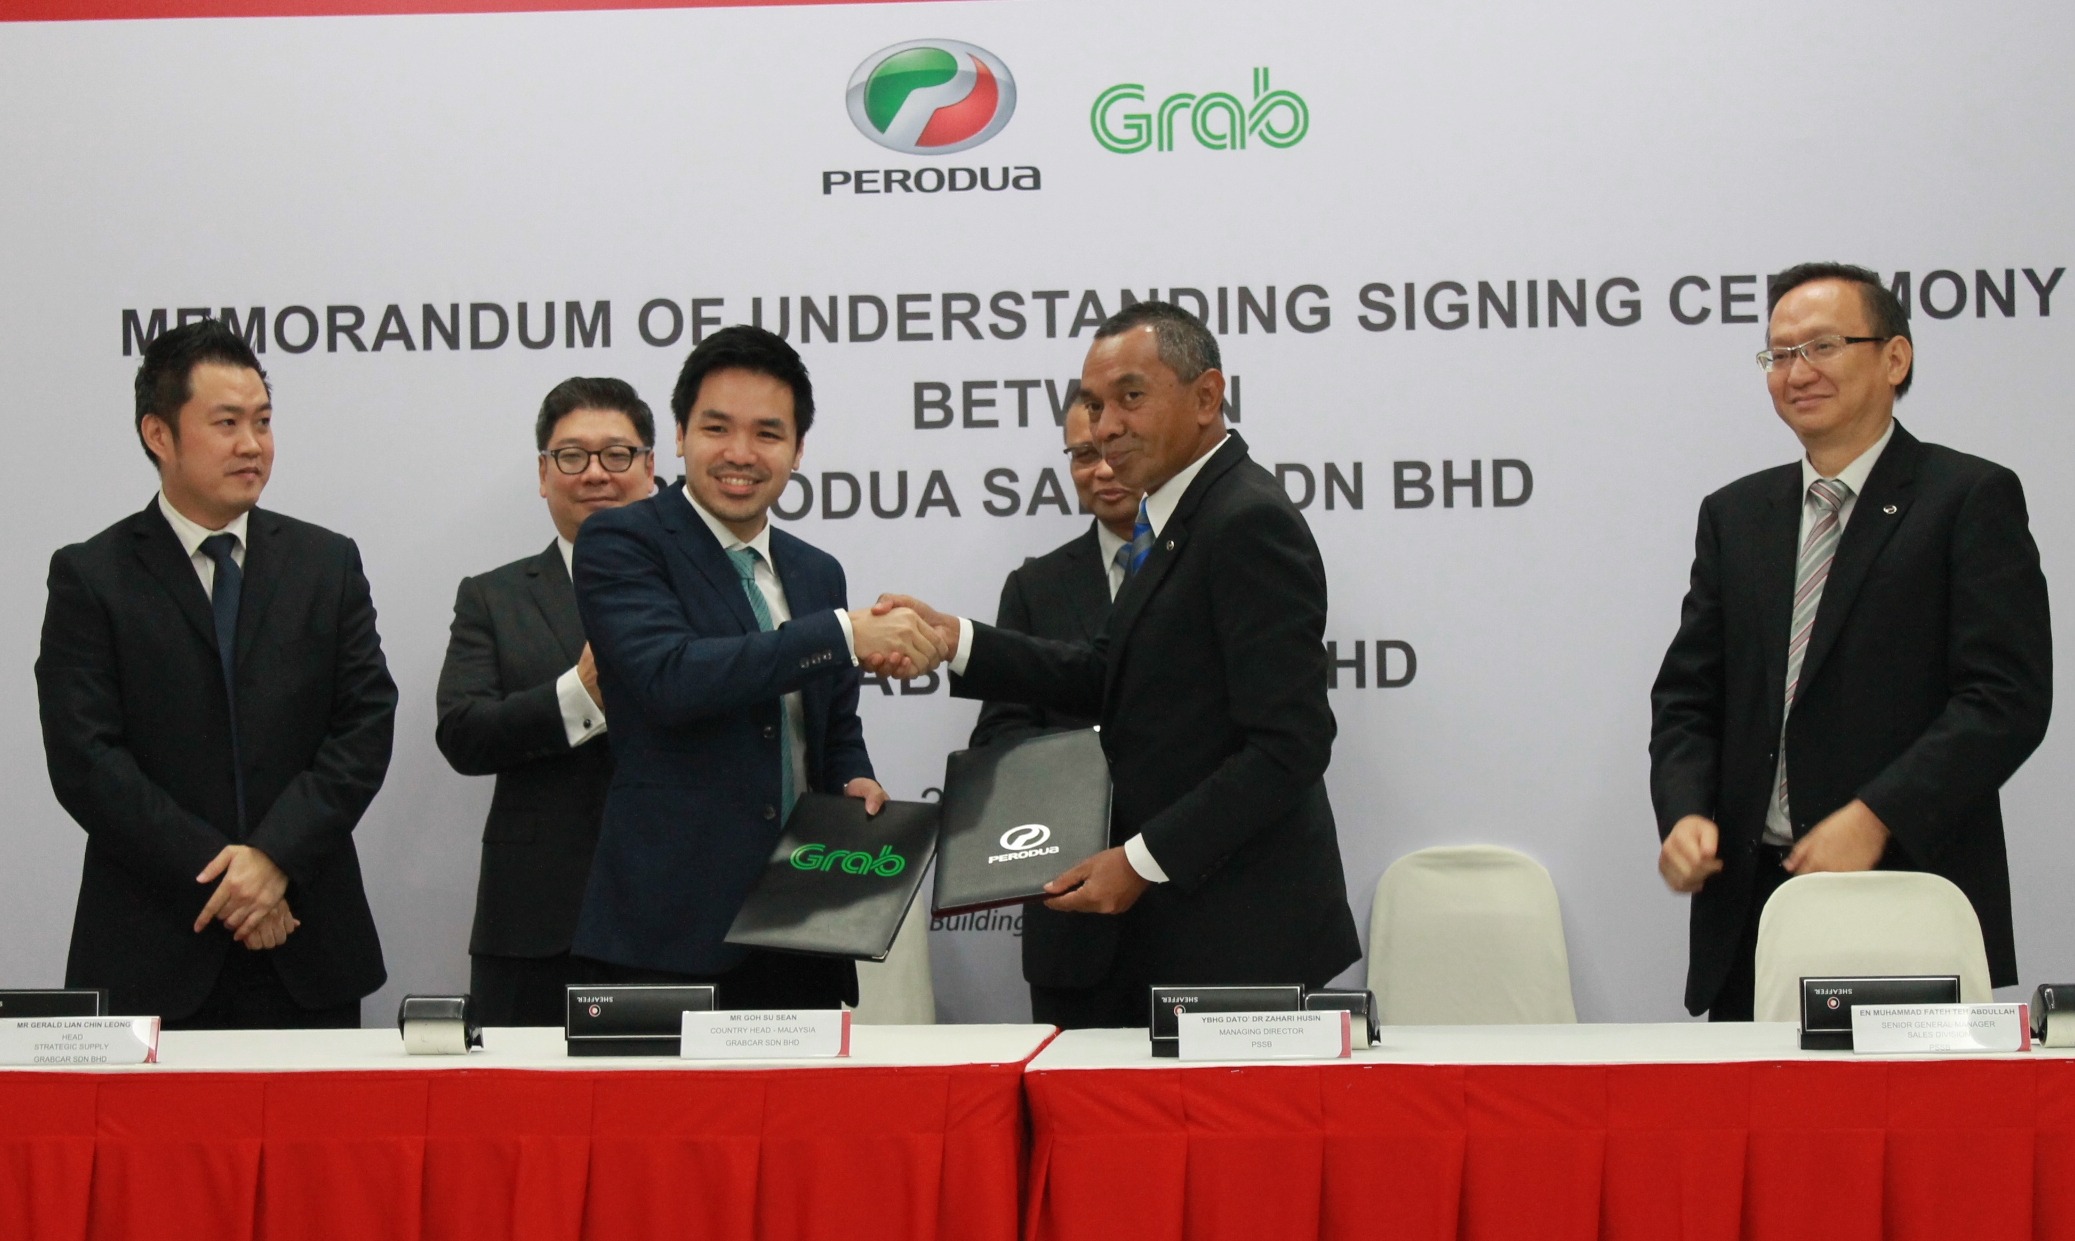 Perodua and Grab partner to offer Bezza, Myvi and Alza at 